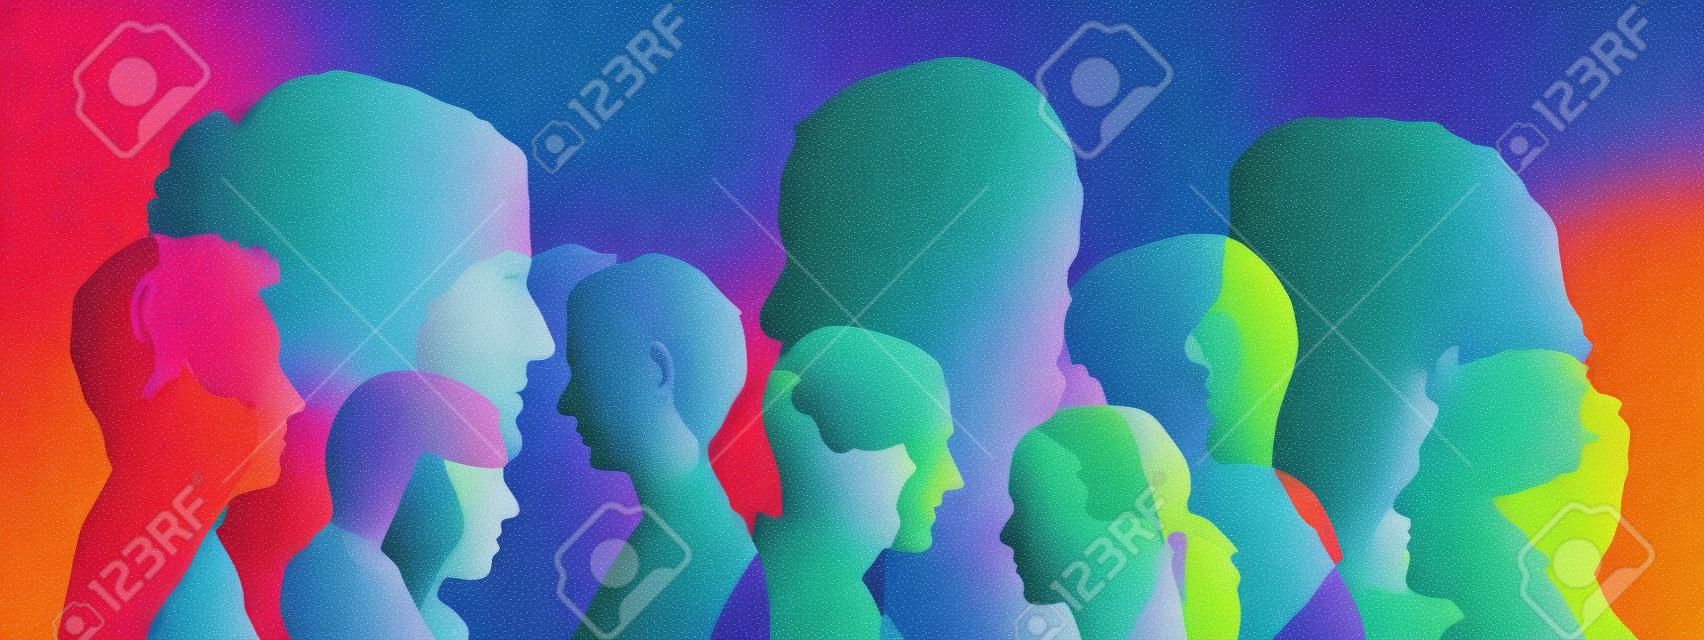 Many heads team as illustration in different bright colors